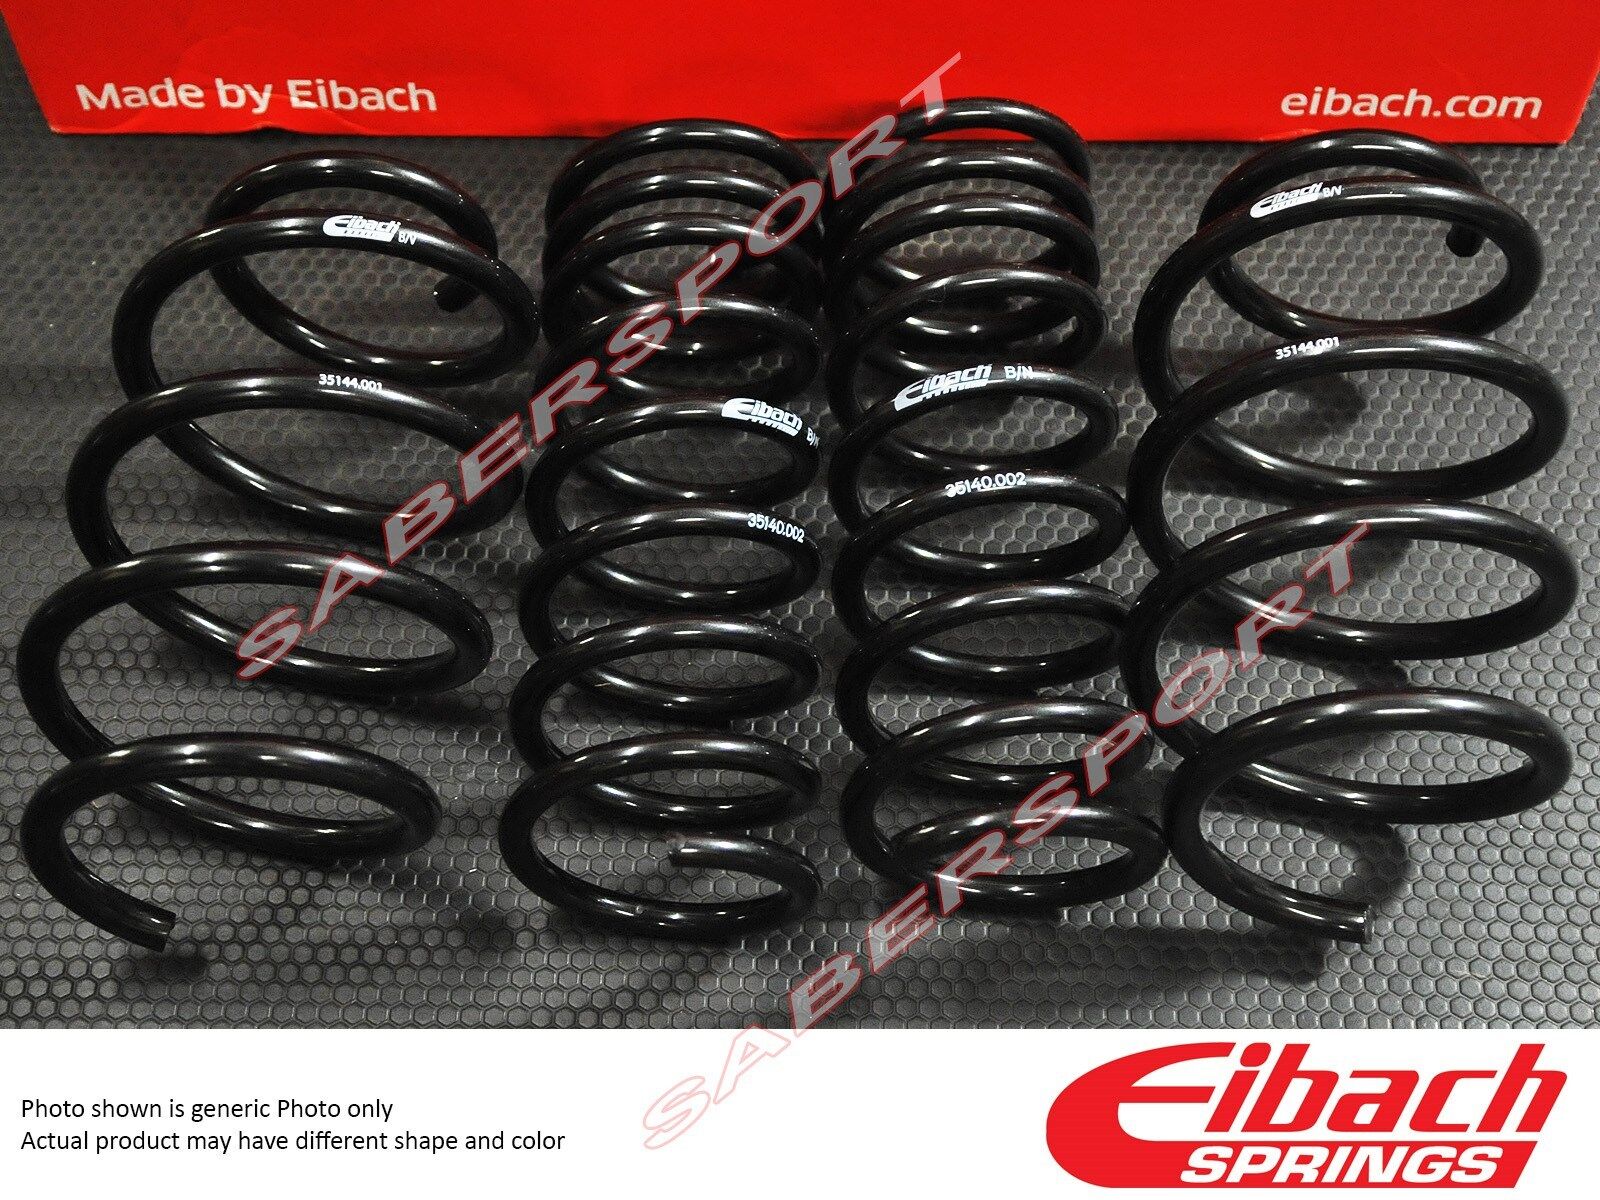 Eibach Pro-Kit Series Lowering Springs for 2005-2010 Cobalt / HHR / G5 Coupe